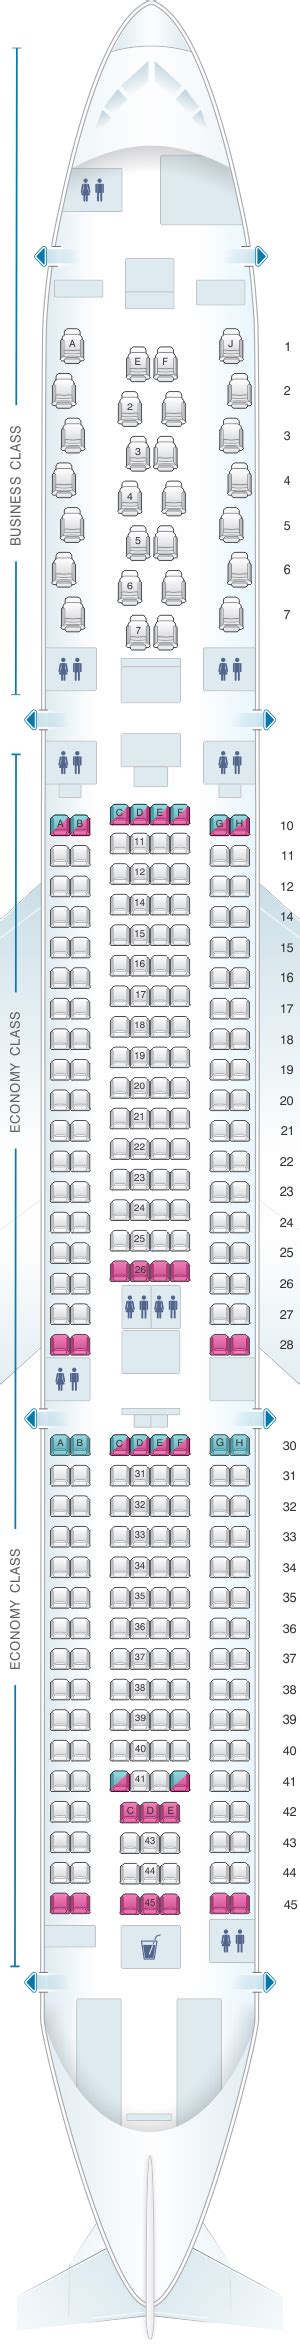 Airbus A330 900neo Seat Map